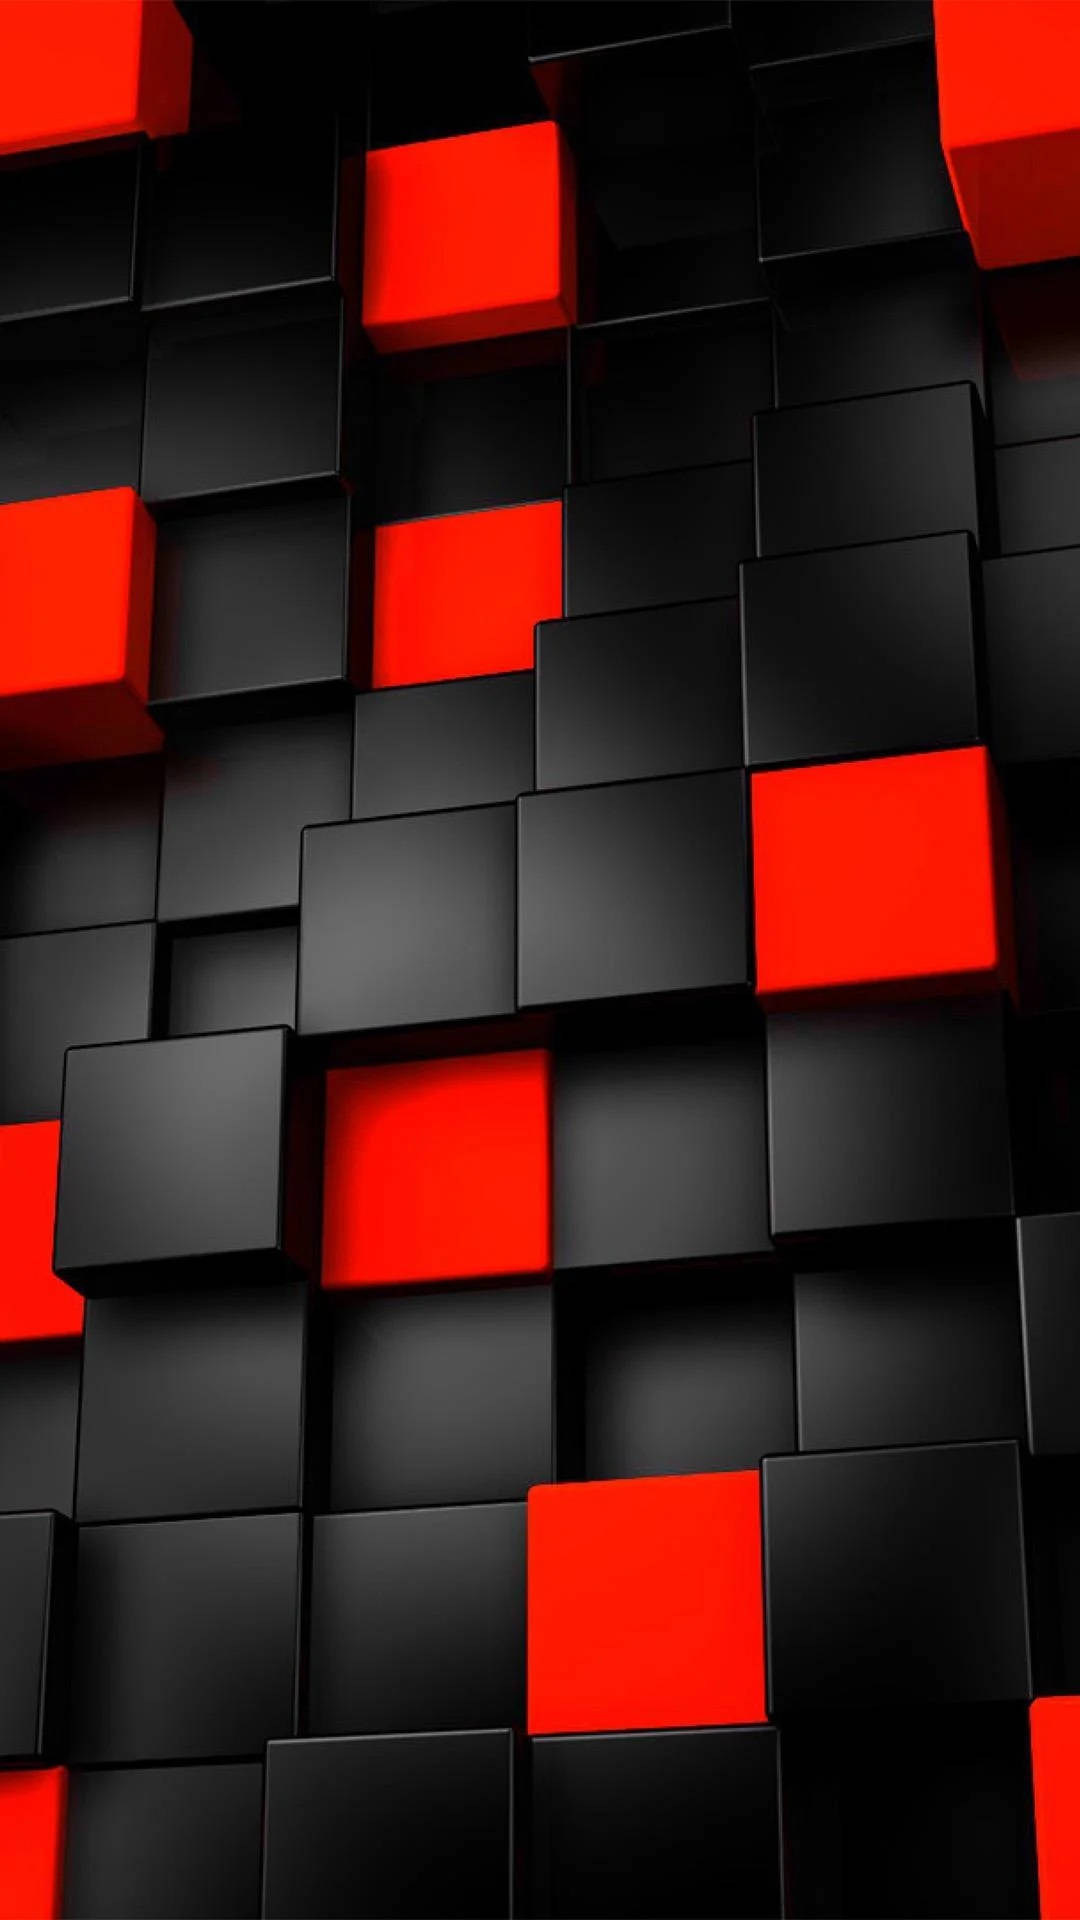 Cube Patterned Black And Red Iphone Background